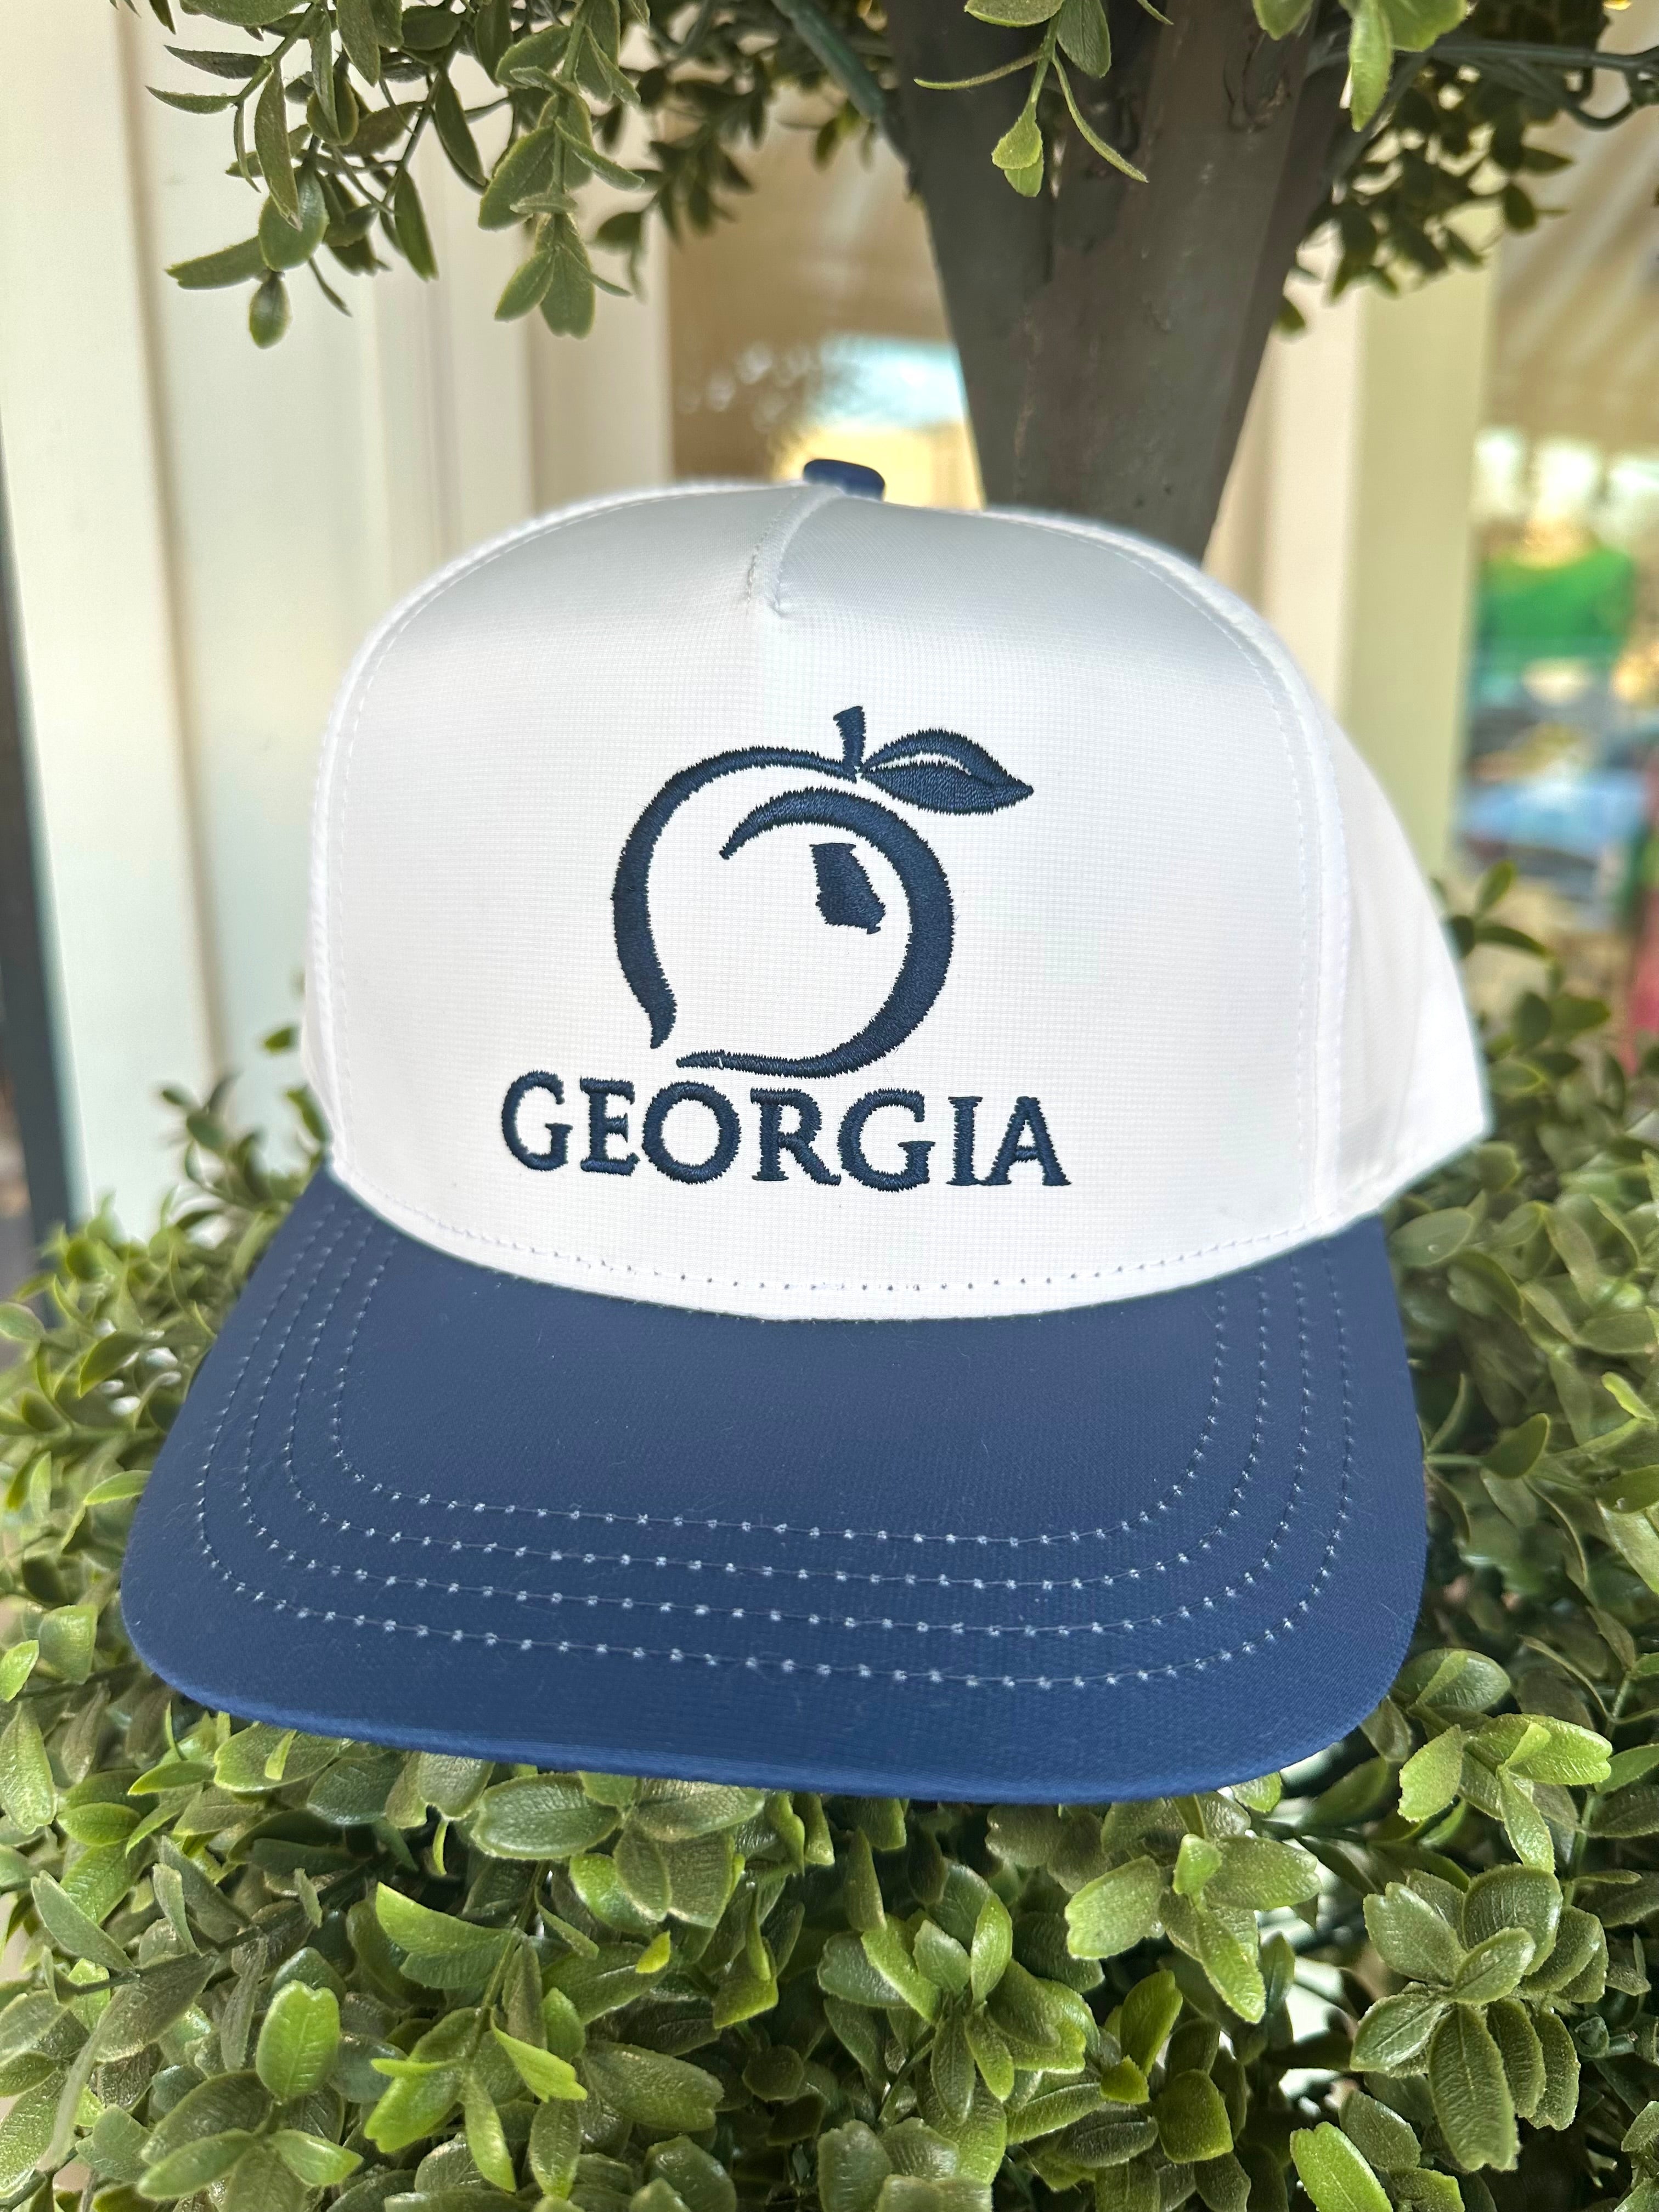 Original Georgia Performance Hat in White and Navy by Peach State Pride